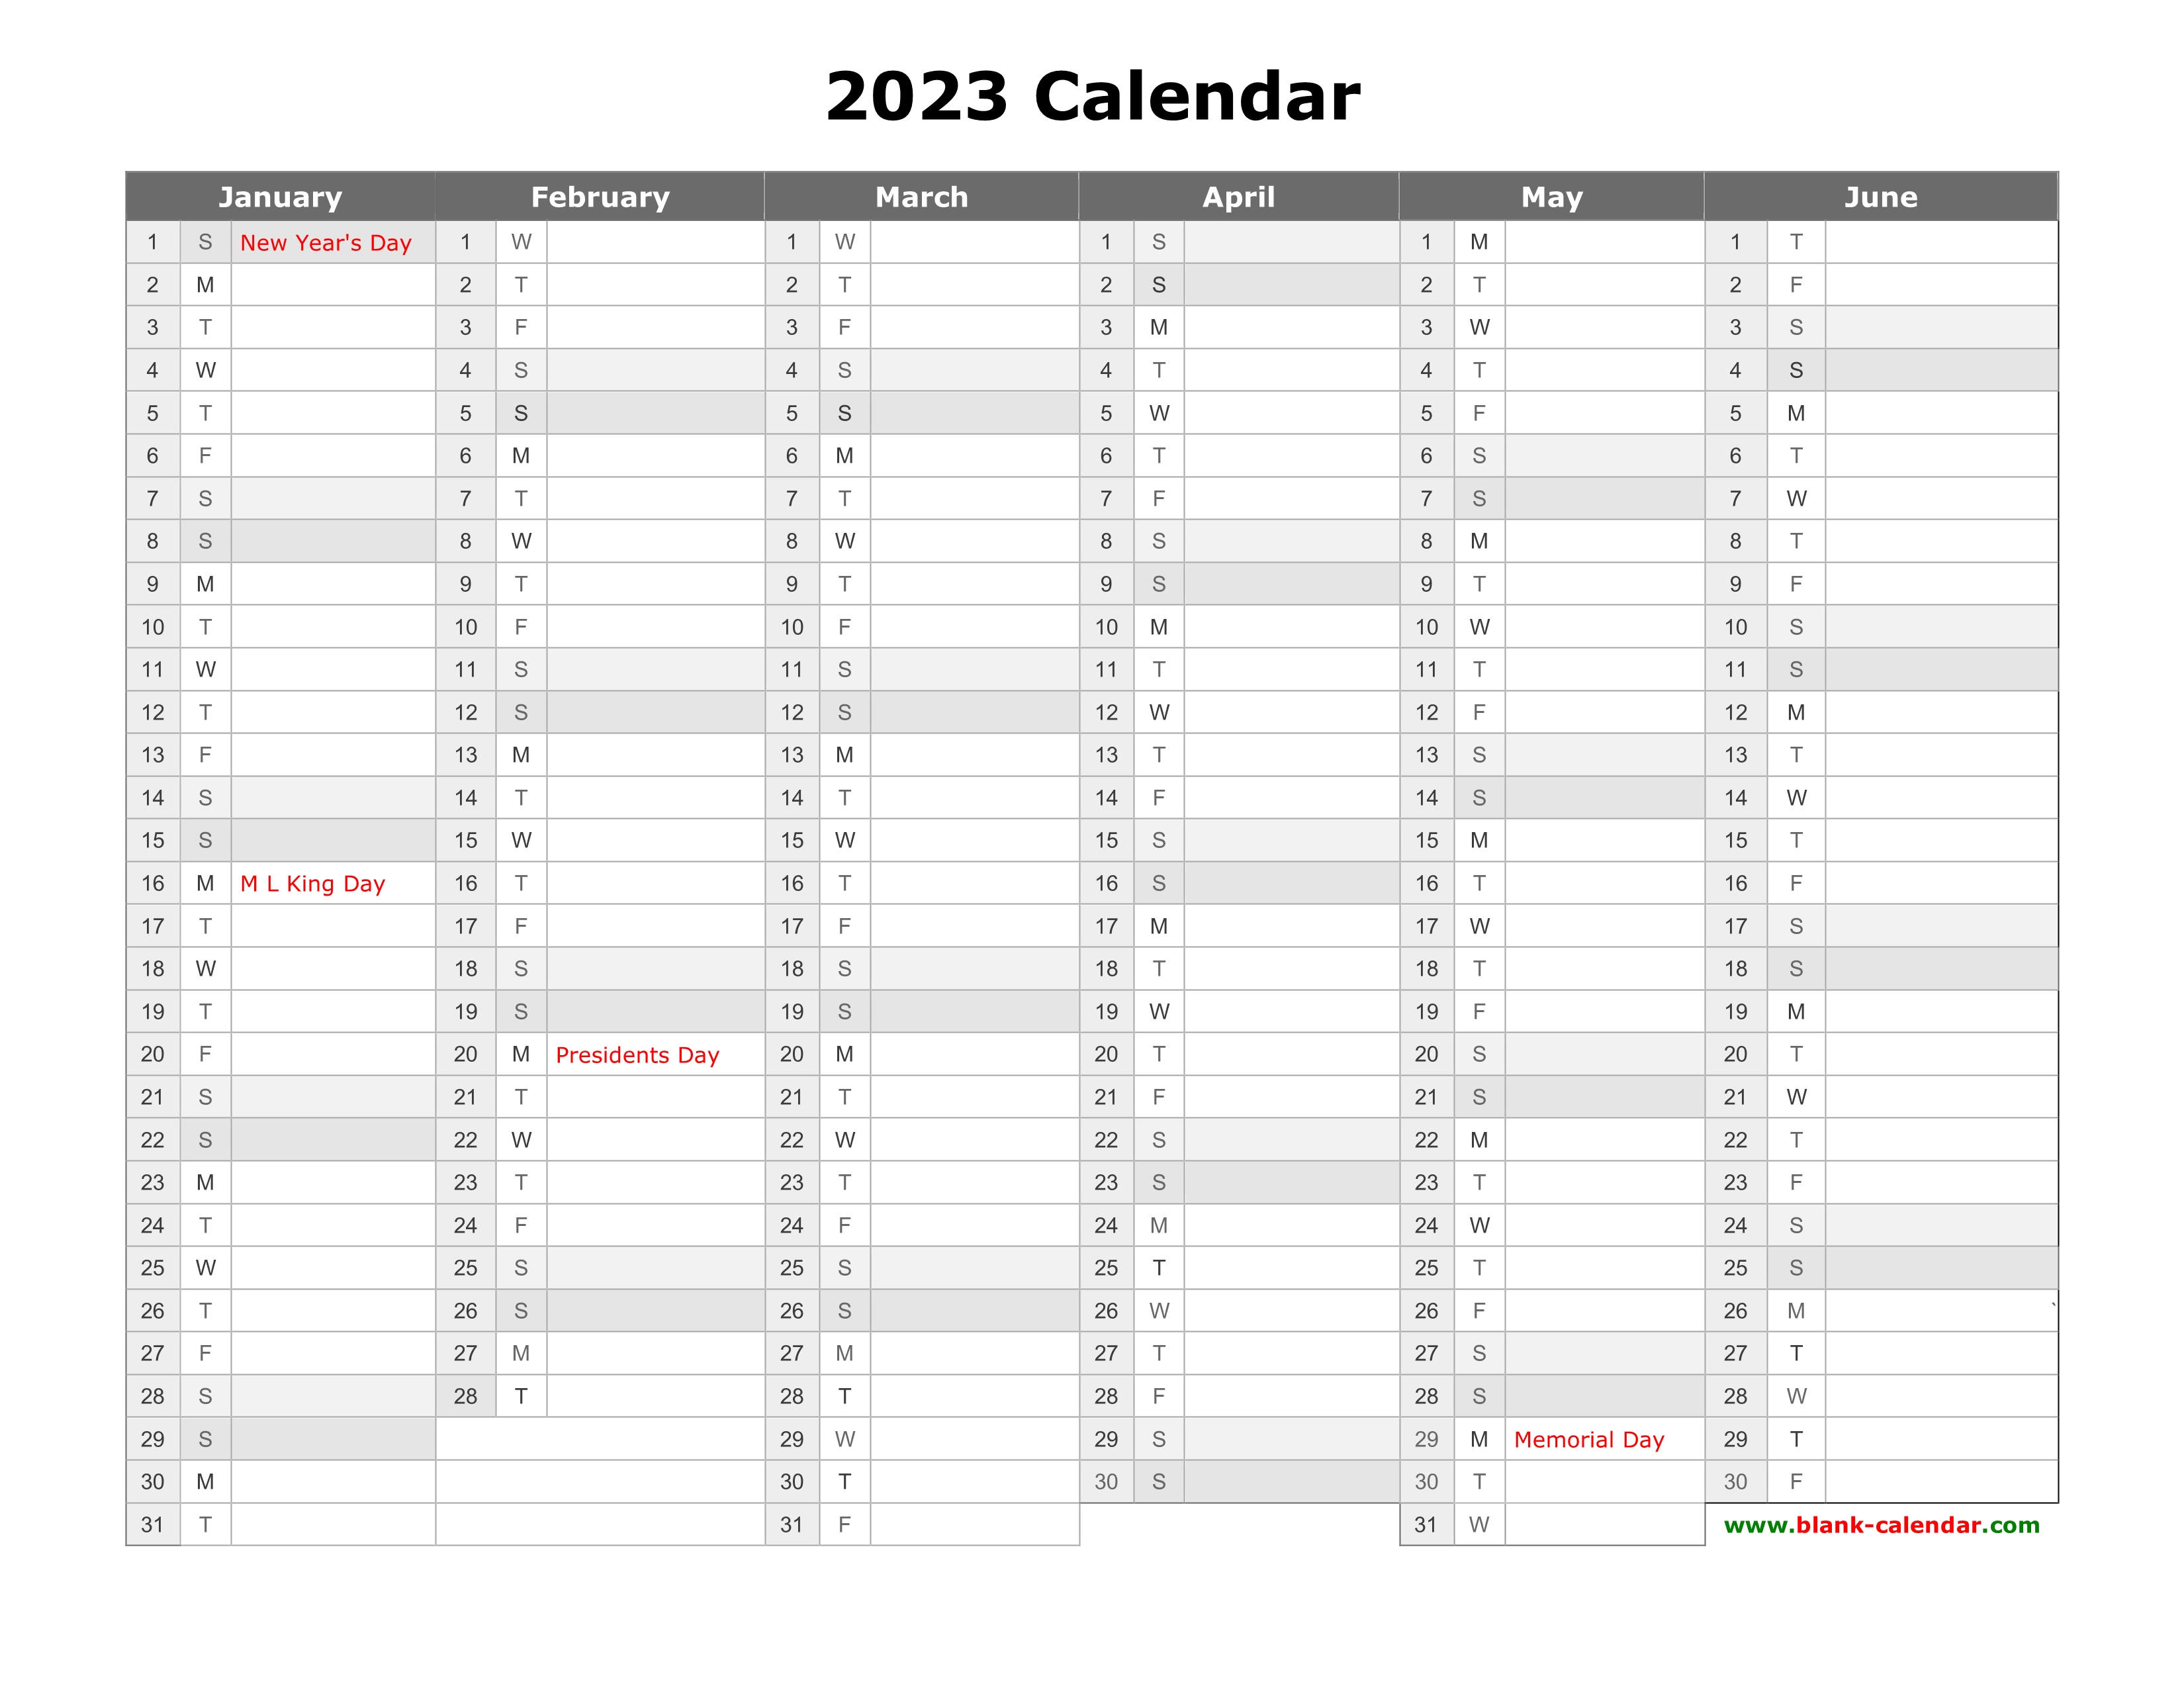 Free Download Printable Calendar 2023 Month In A Column Half A Year 